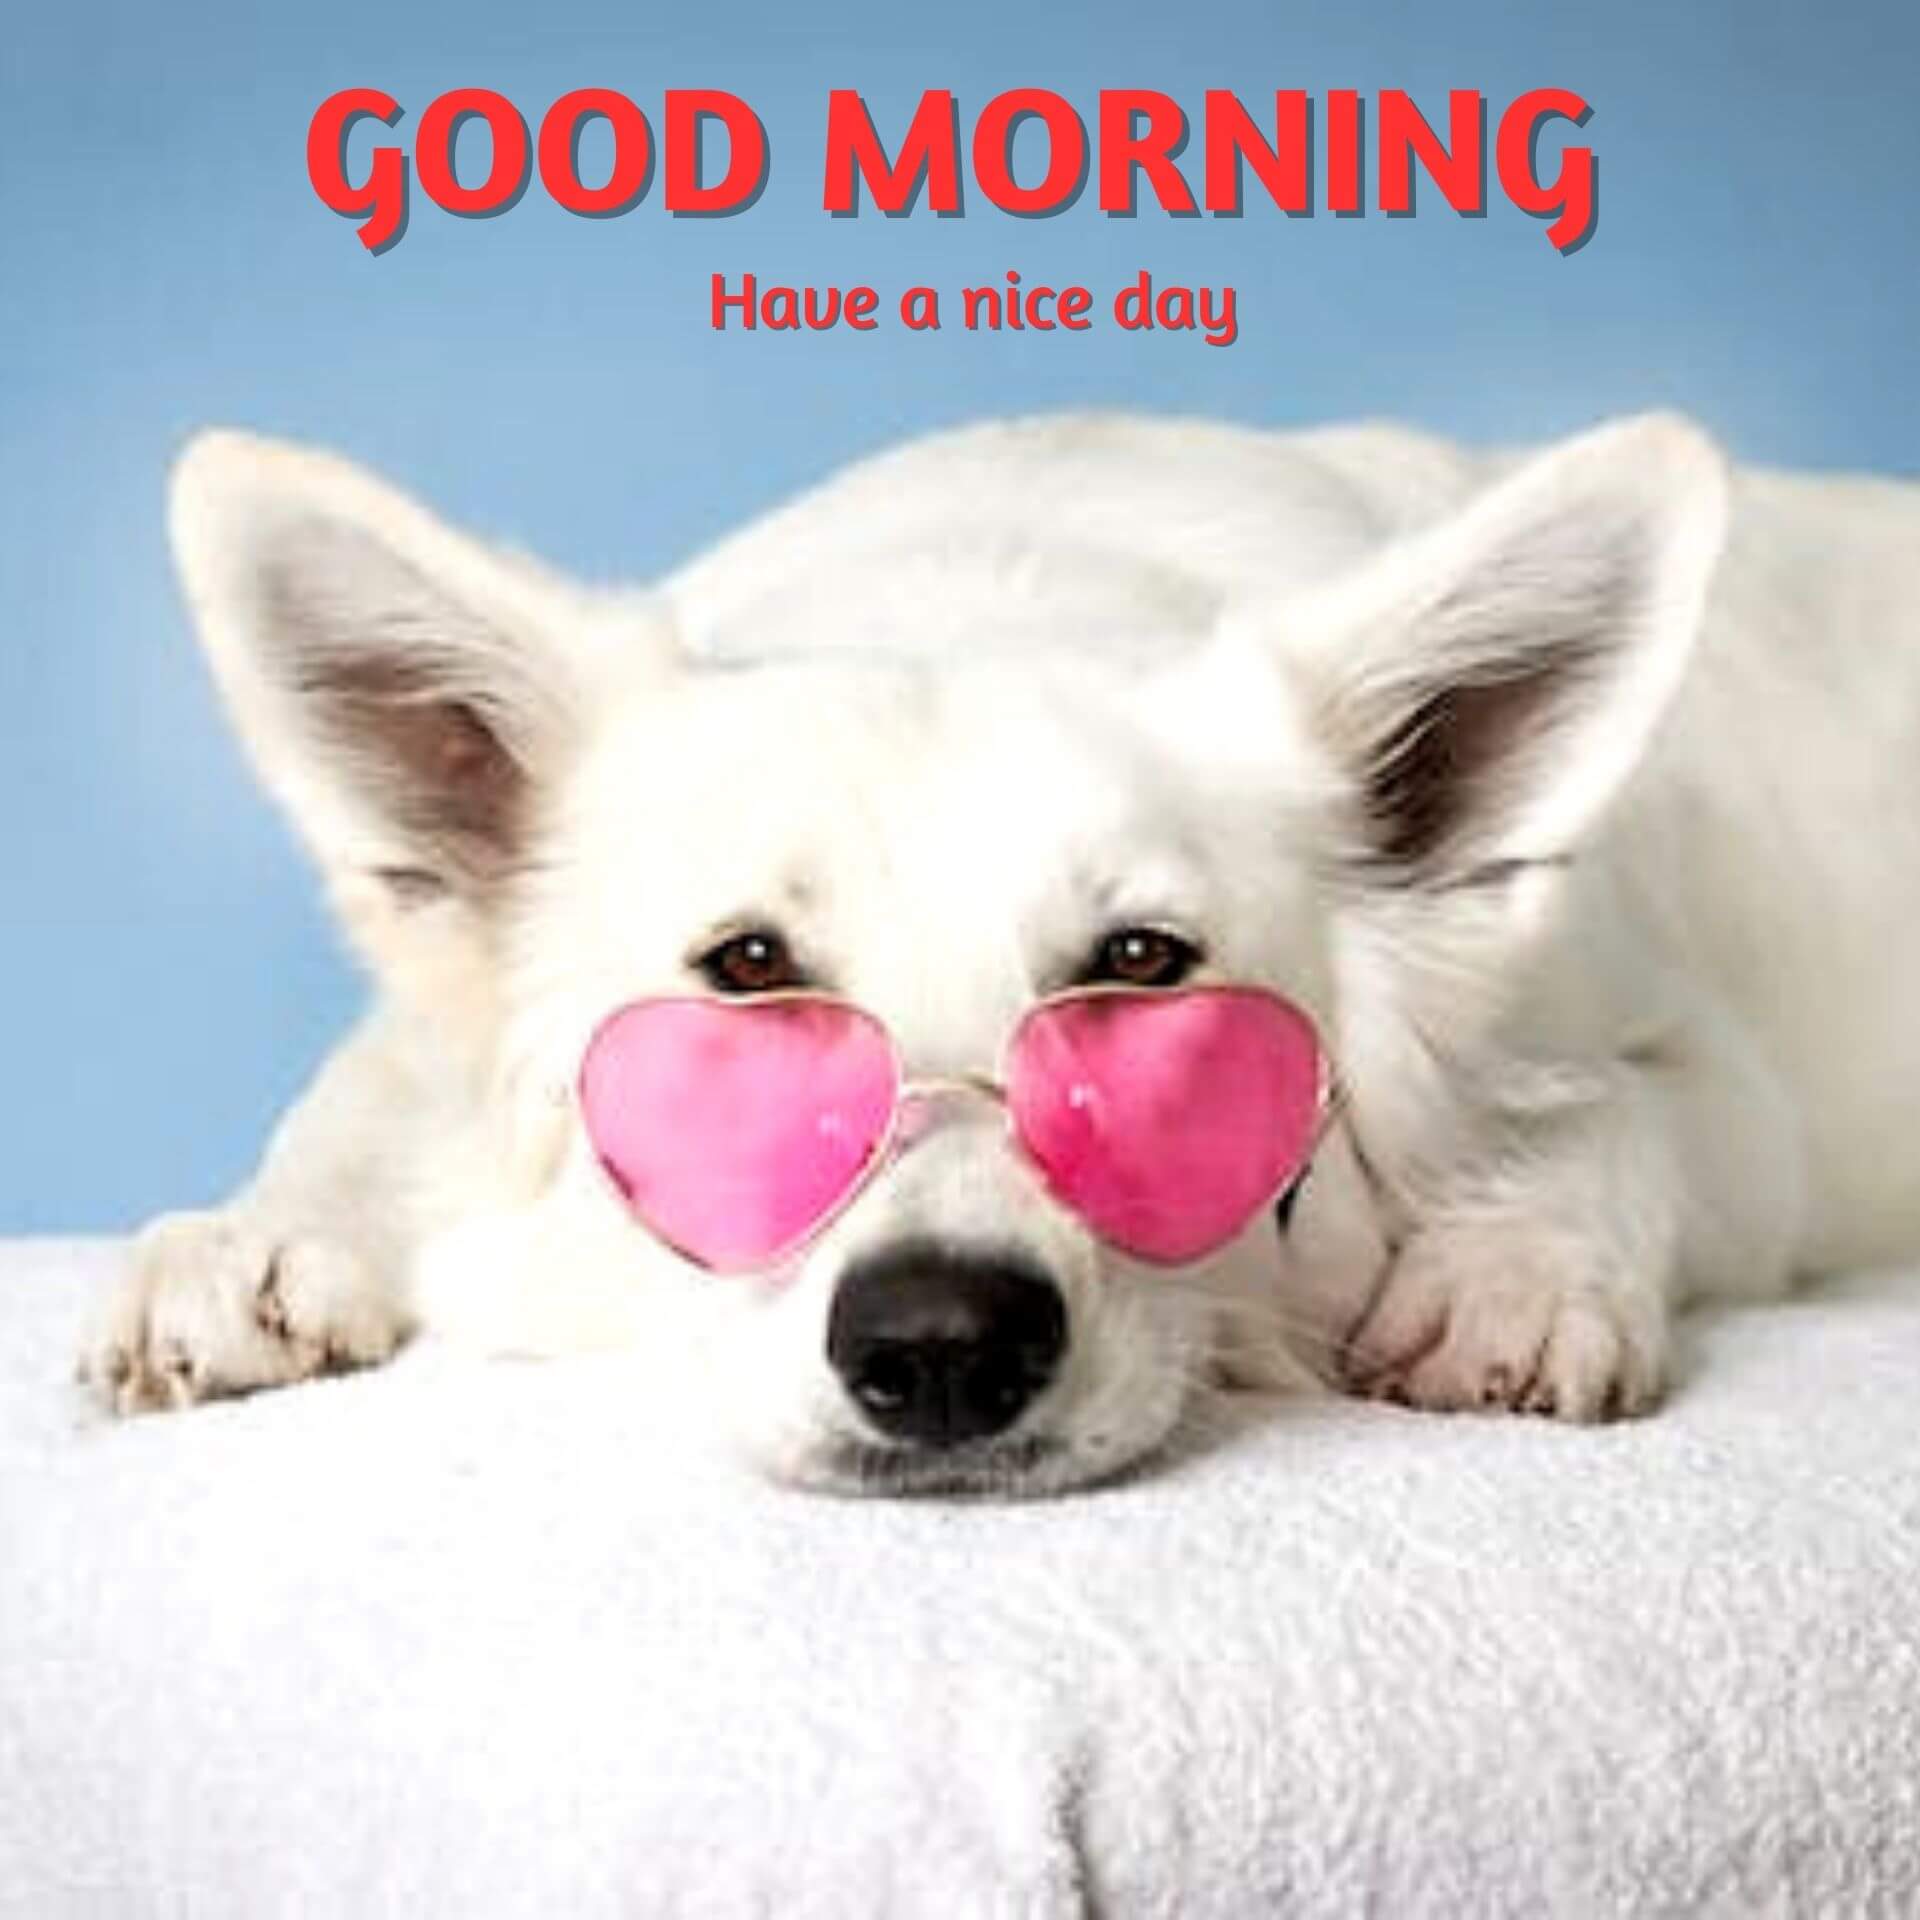 Cute Puppy Good Morning Pics Pictures Download